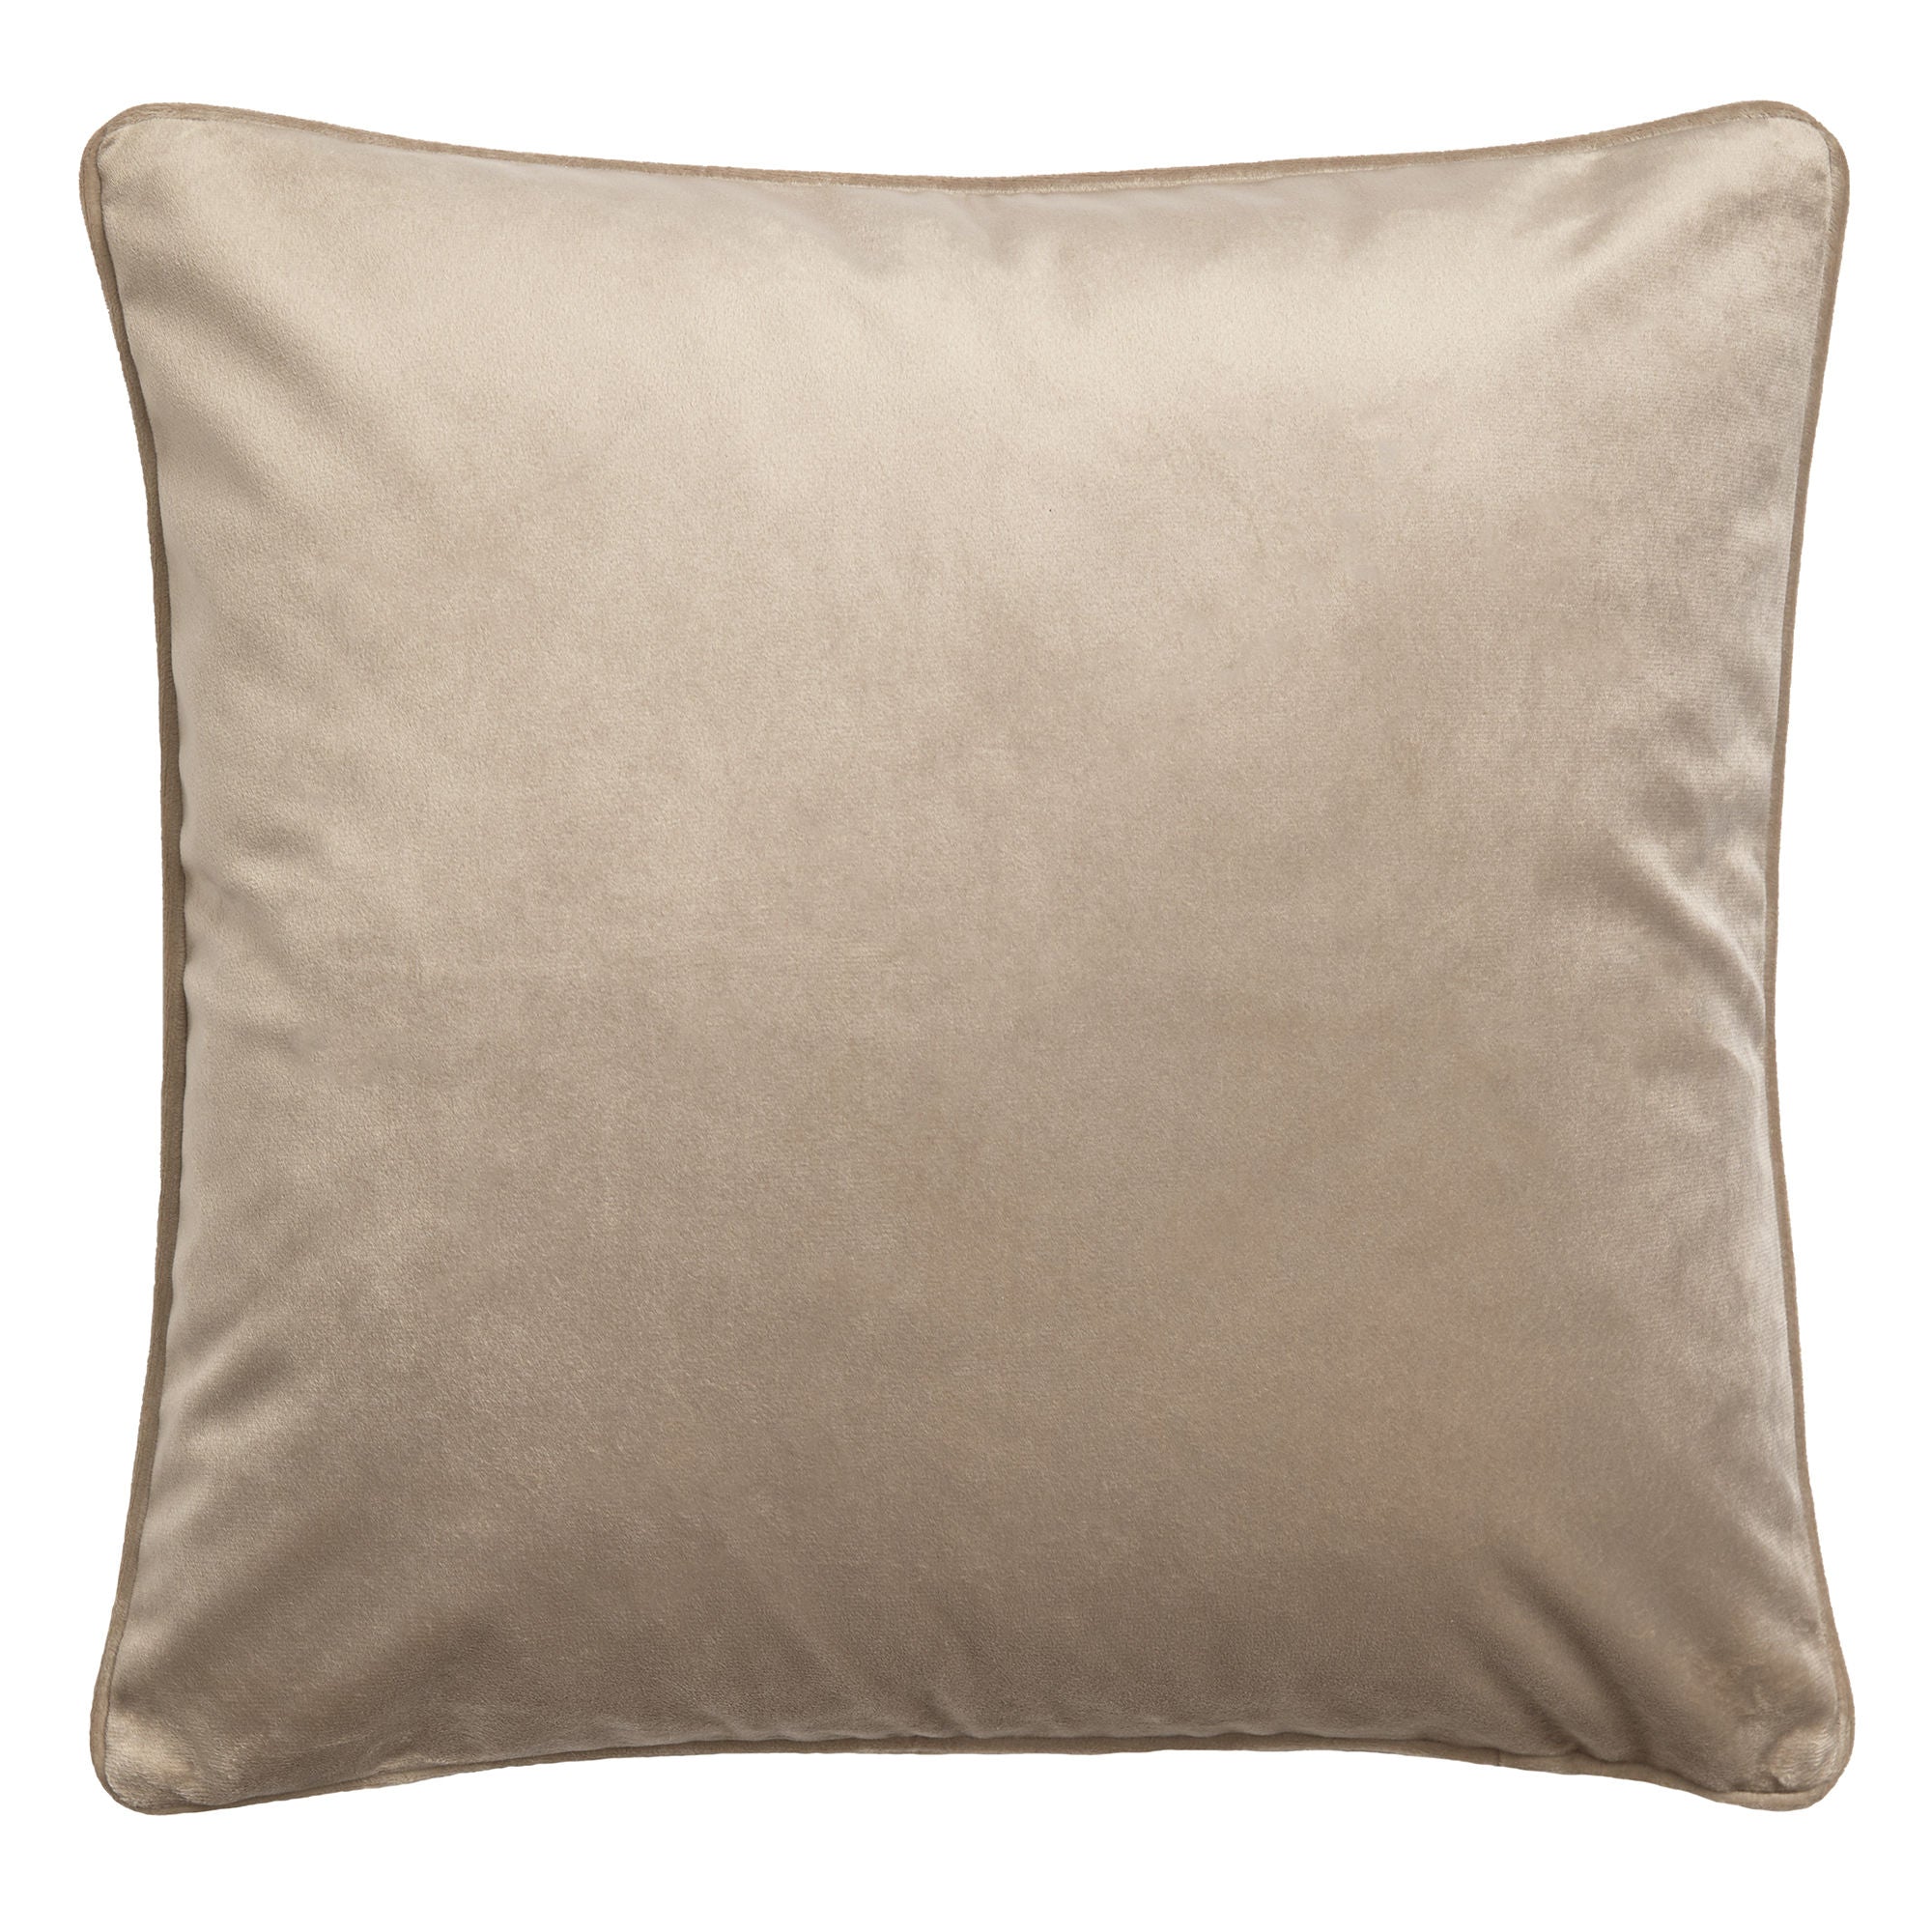 Montrose Cushion by Laurence Llewelyn-Bowen in Linen 43 x 43cm - Cushion - Laurence Llewelyn-Bowen